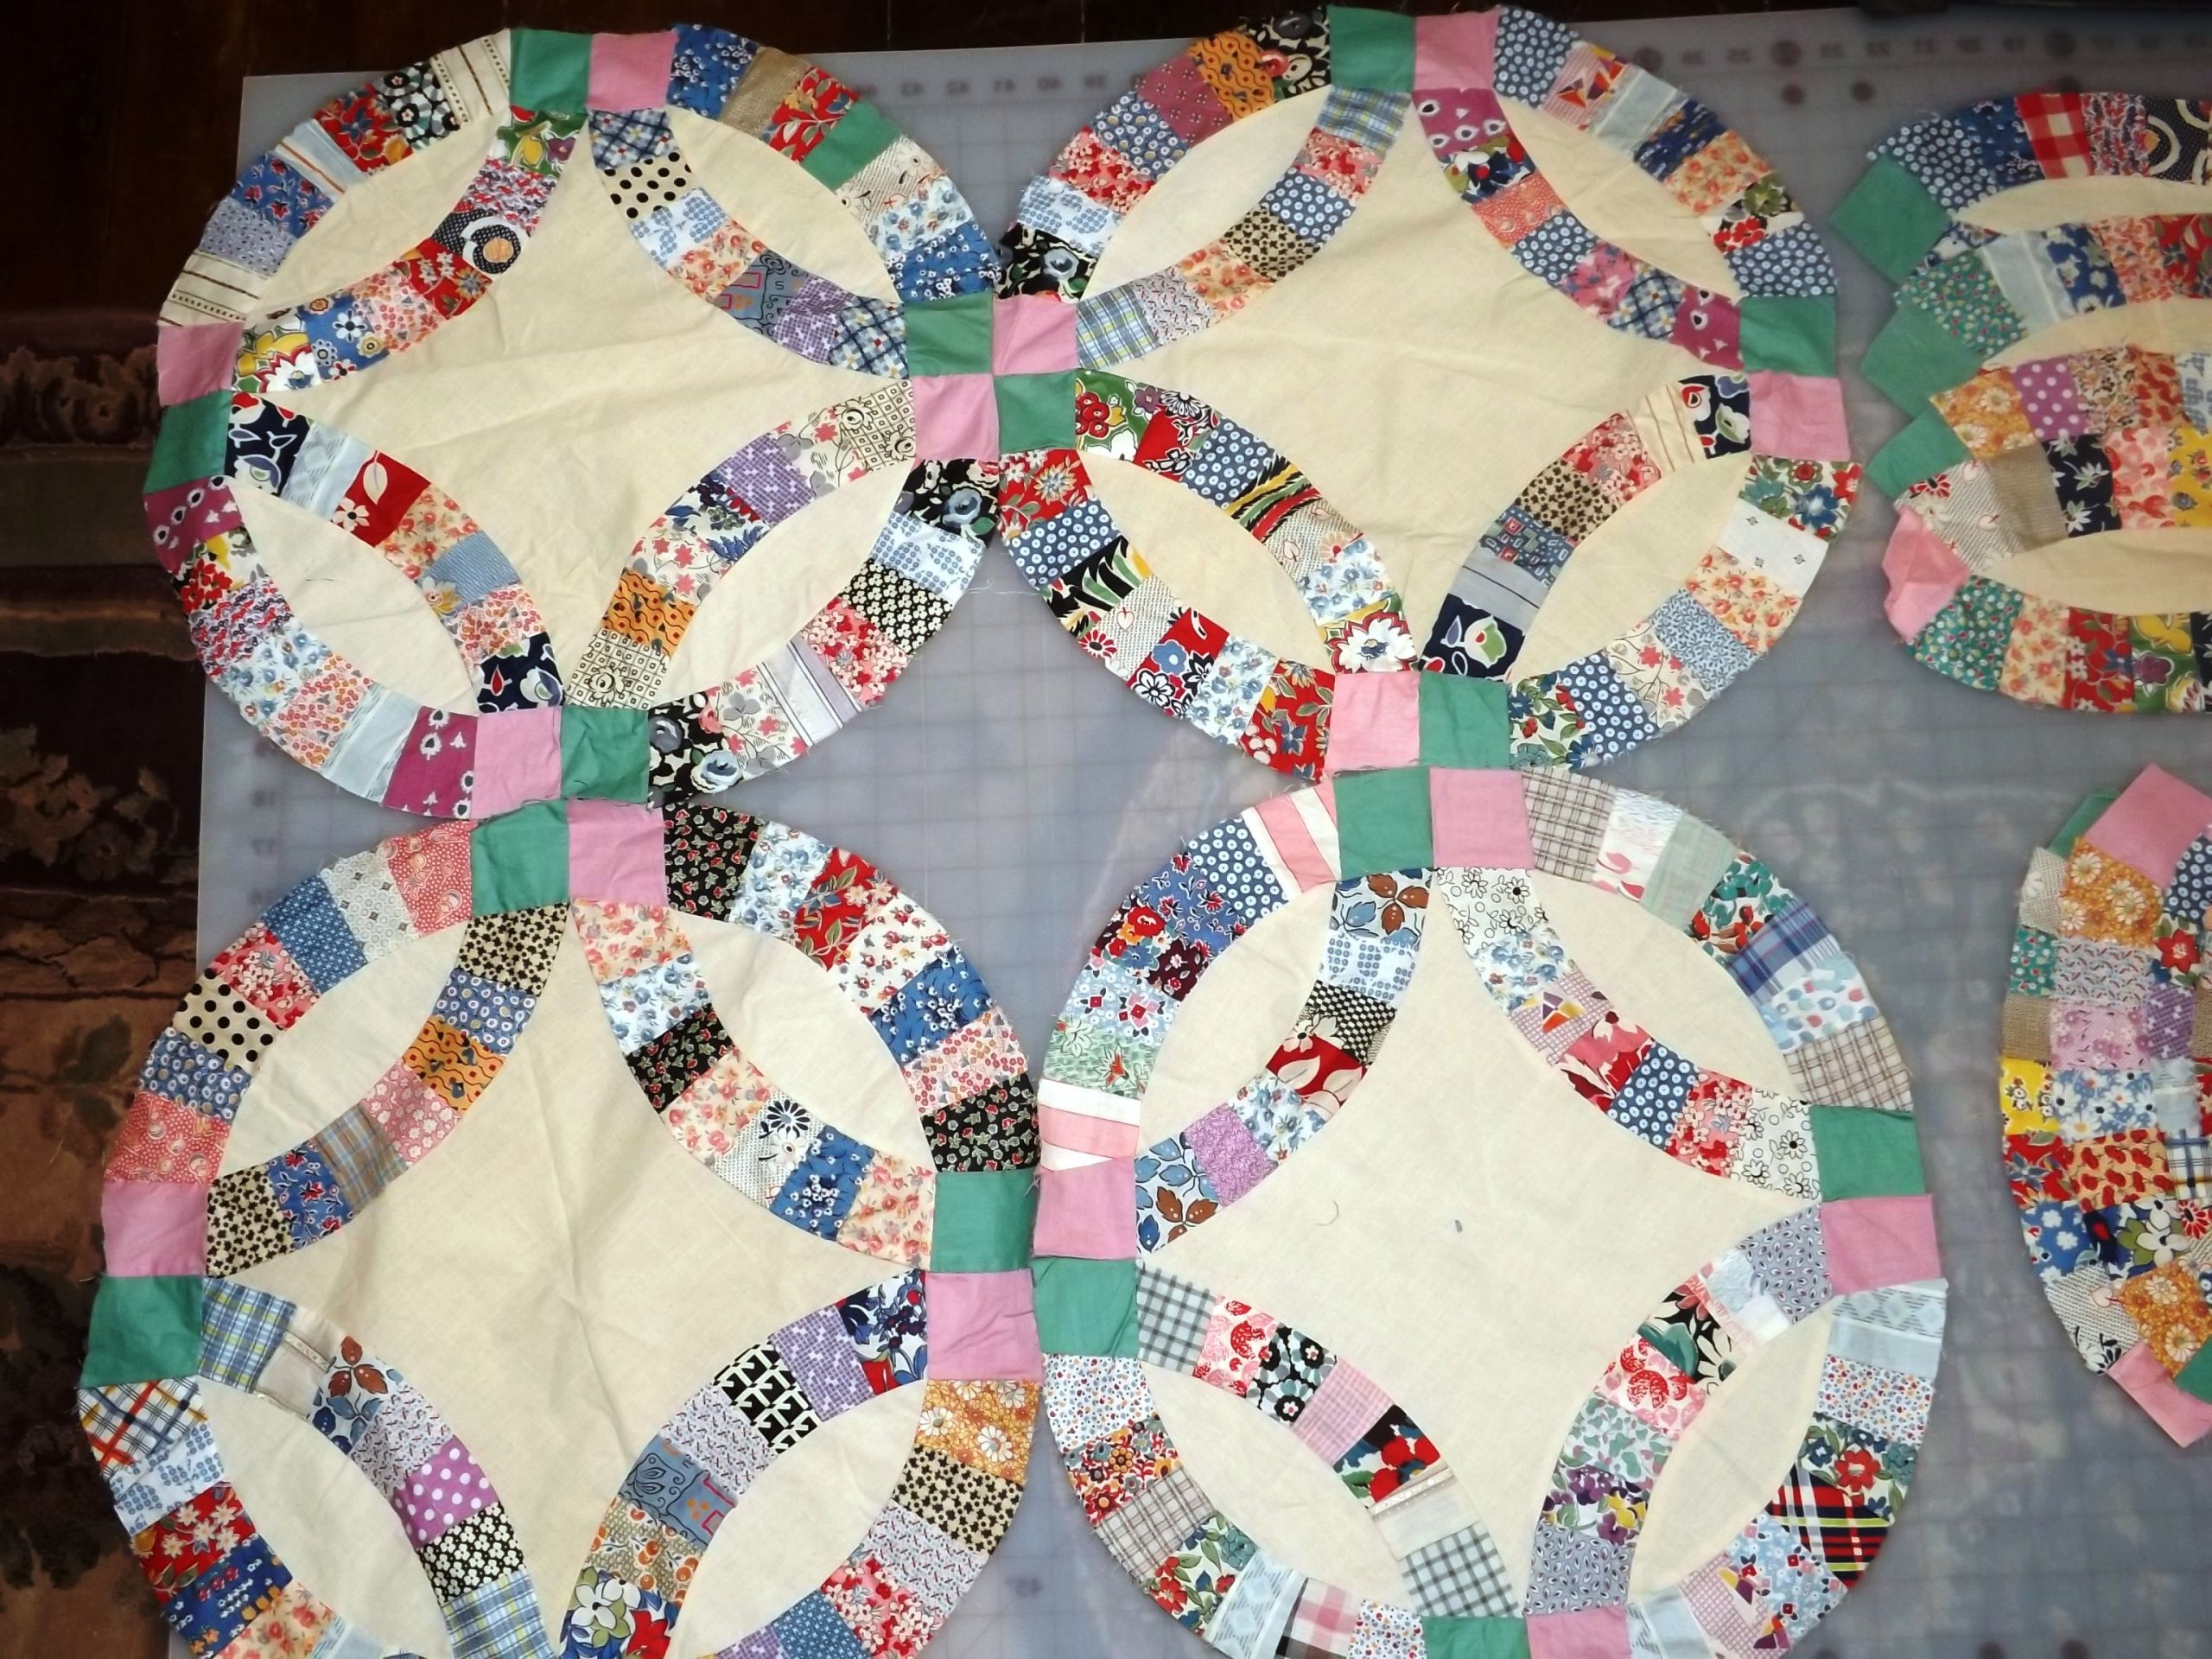 Wedding Ring Quilt
 A new look at an old block